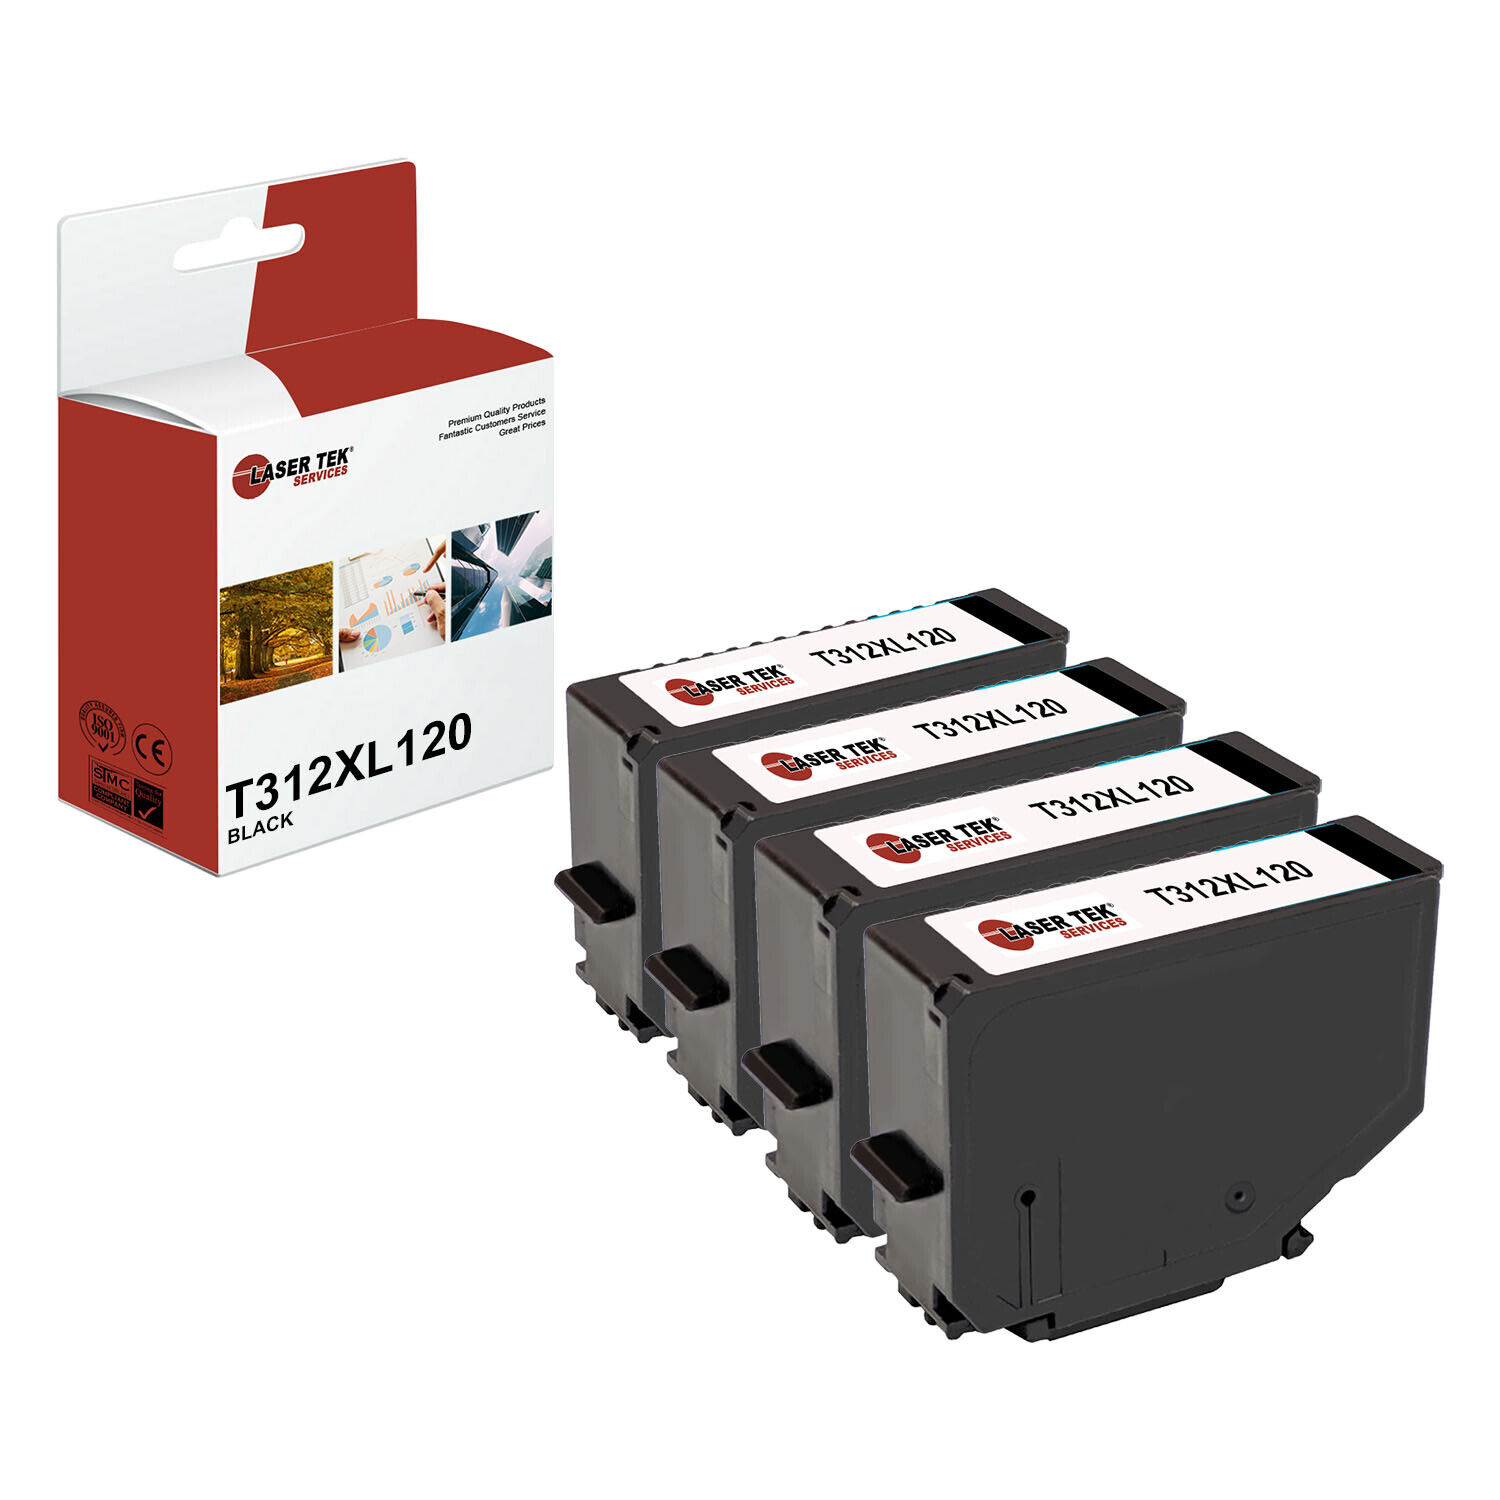 4Pk LTS T312XL120 Black HY Remanufactured for Epson Expression XP-8500 Ink